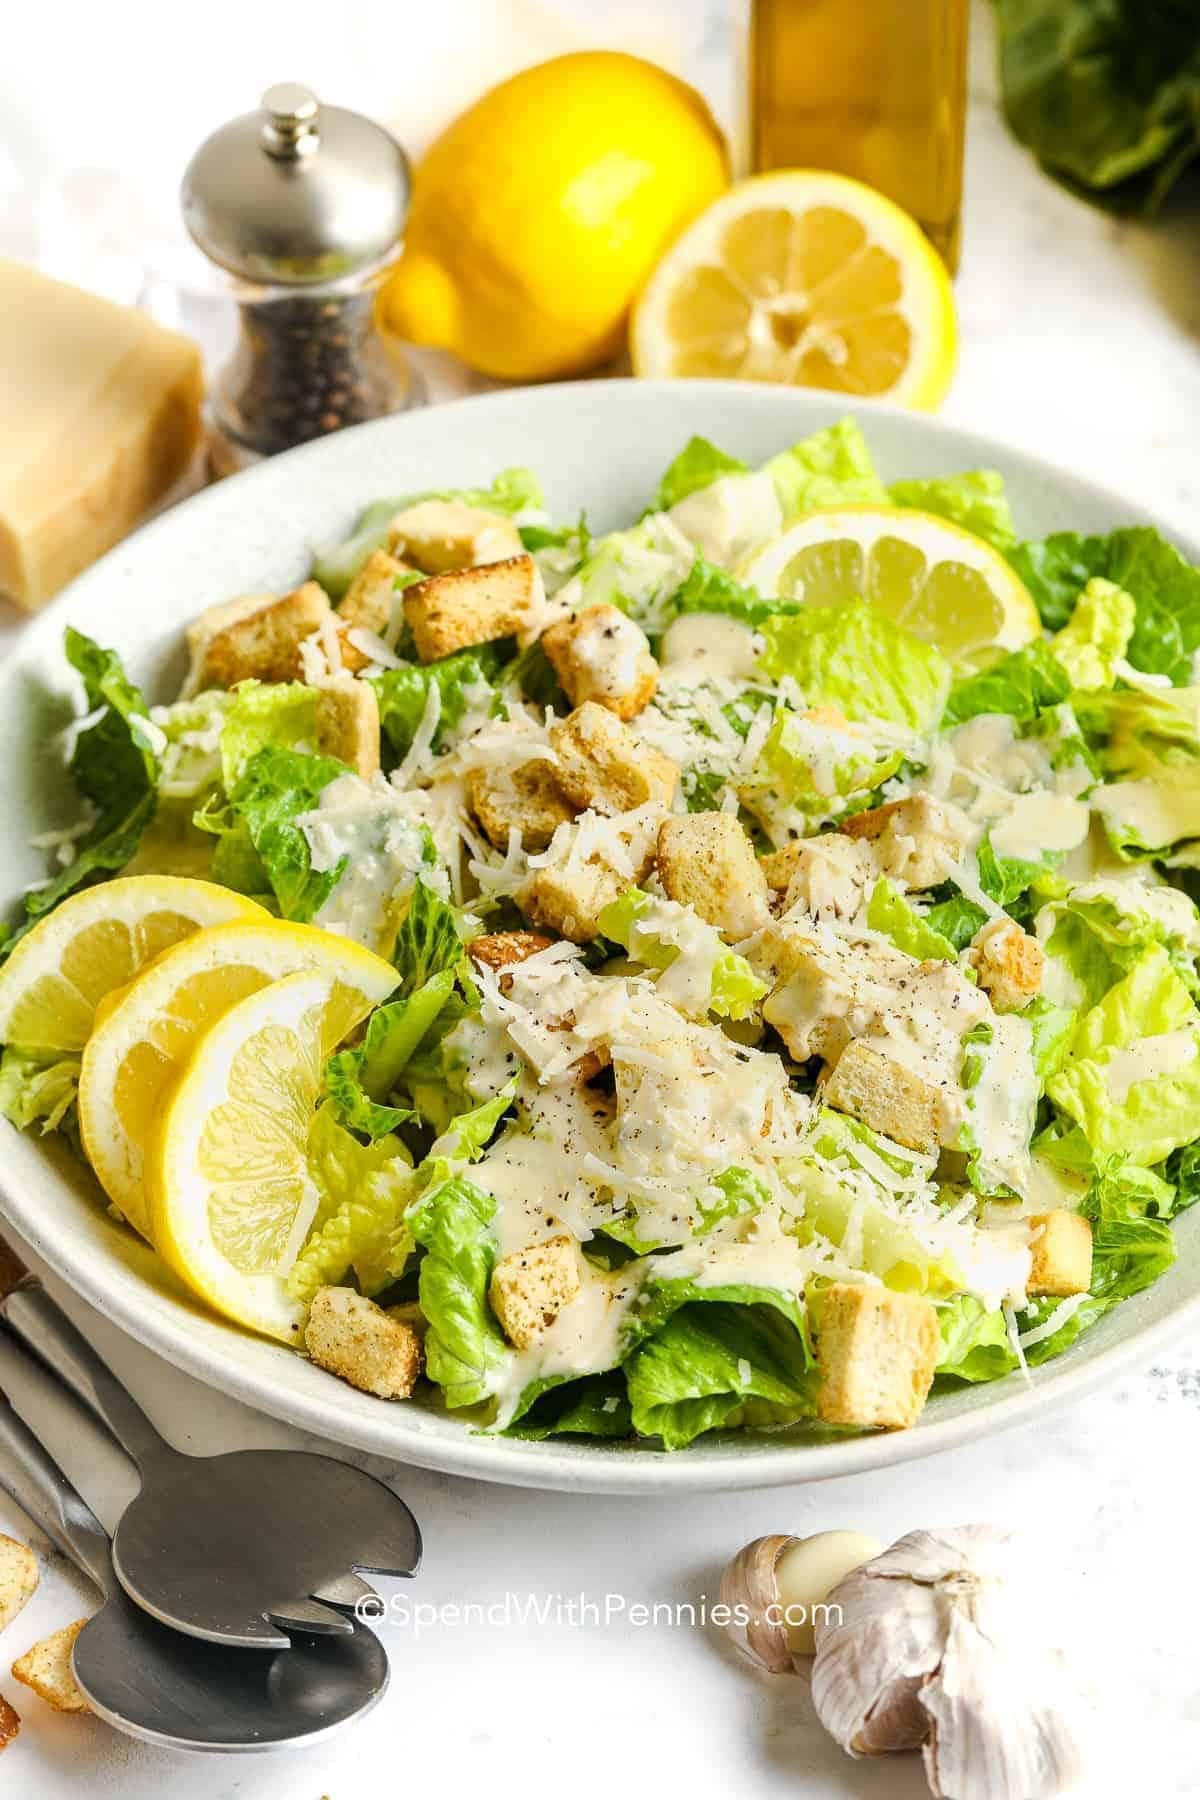 Caesar salad on a bowl with crunchy croutons and crisp greens garnished with lemon slices.